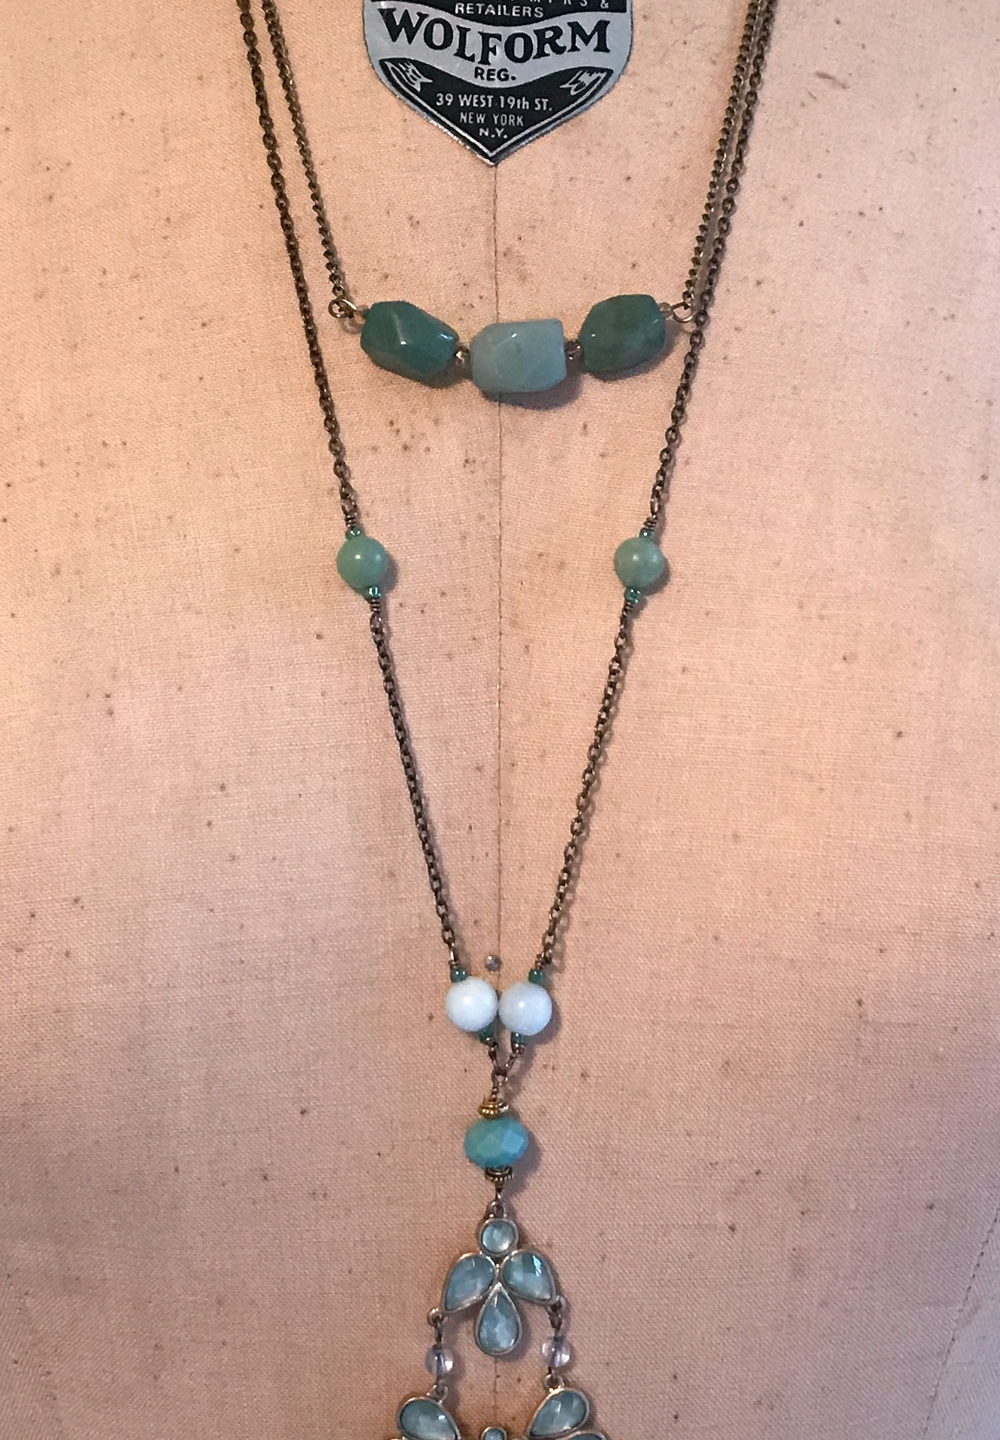 THREE LITTLE KITTENS | 3708n Amazonite and Costume Jewelry Pendant Necklace with 3706n Amazonite Faceted Nugget Bar Necklace